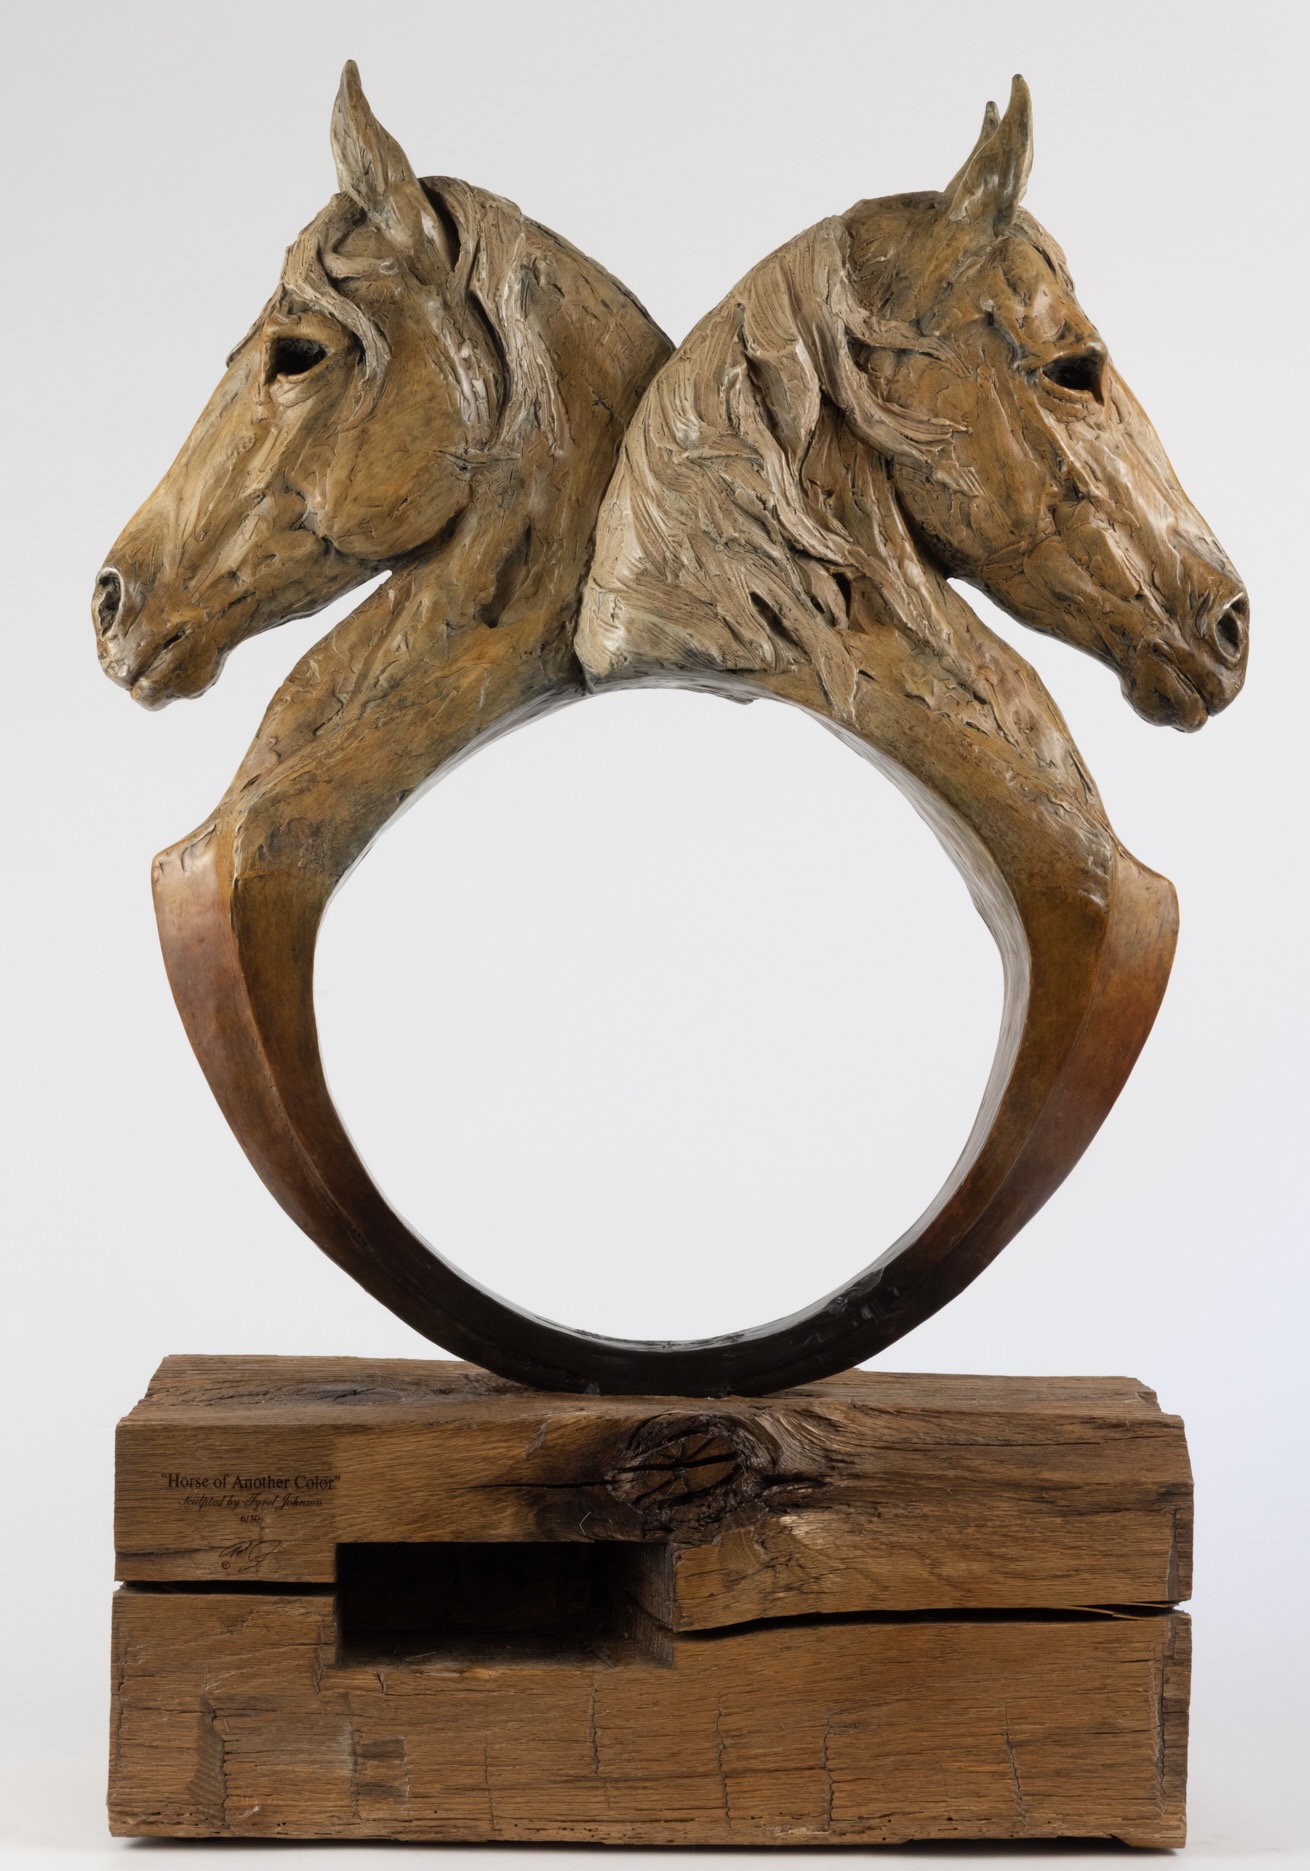 Rising-star Montana artist Tyrel Johnson joins the 2022 WDC Exhibit + Sale with his bronze-and-wood sculptures such as “Horse of Another Color.”